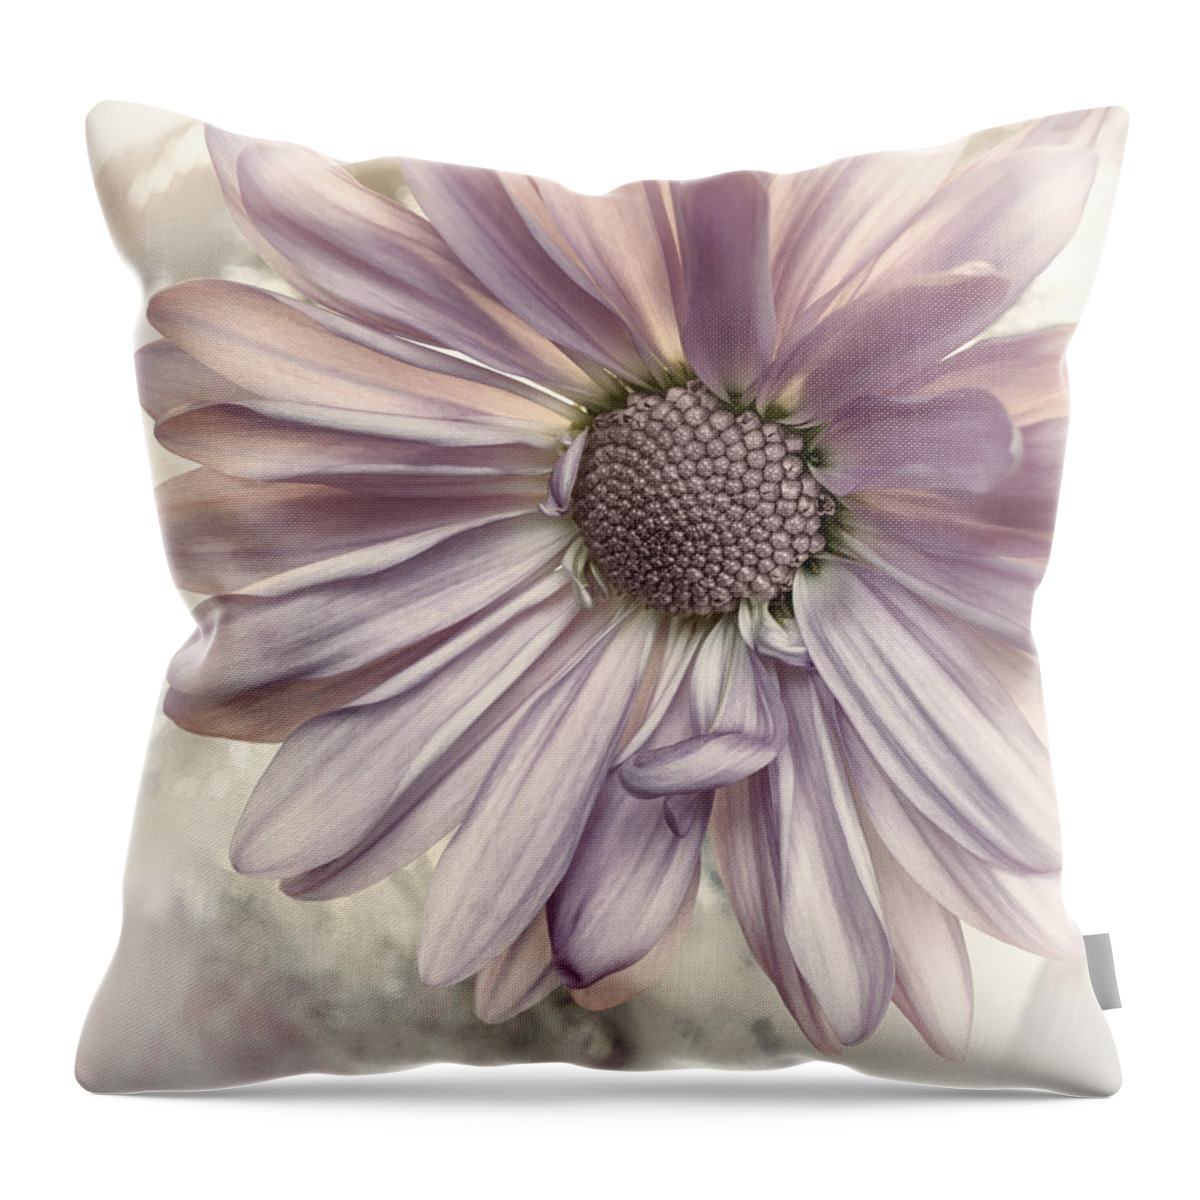 Floral Throw Pillow featuring the photograph Snowberrie Sorbet by Darlene Kwiatkowski